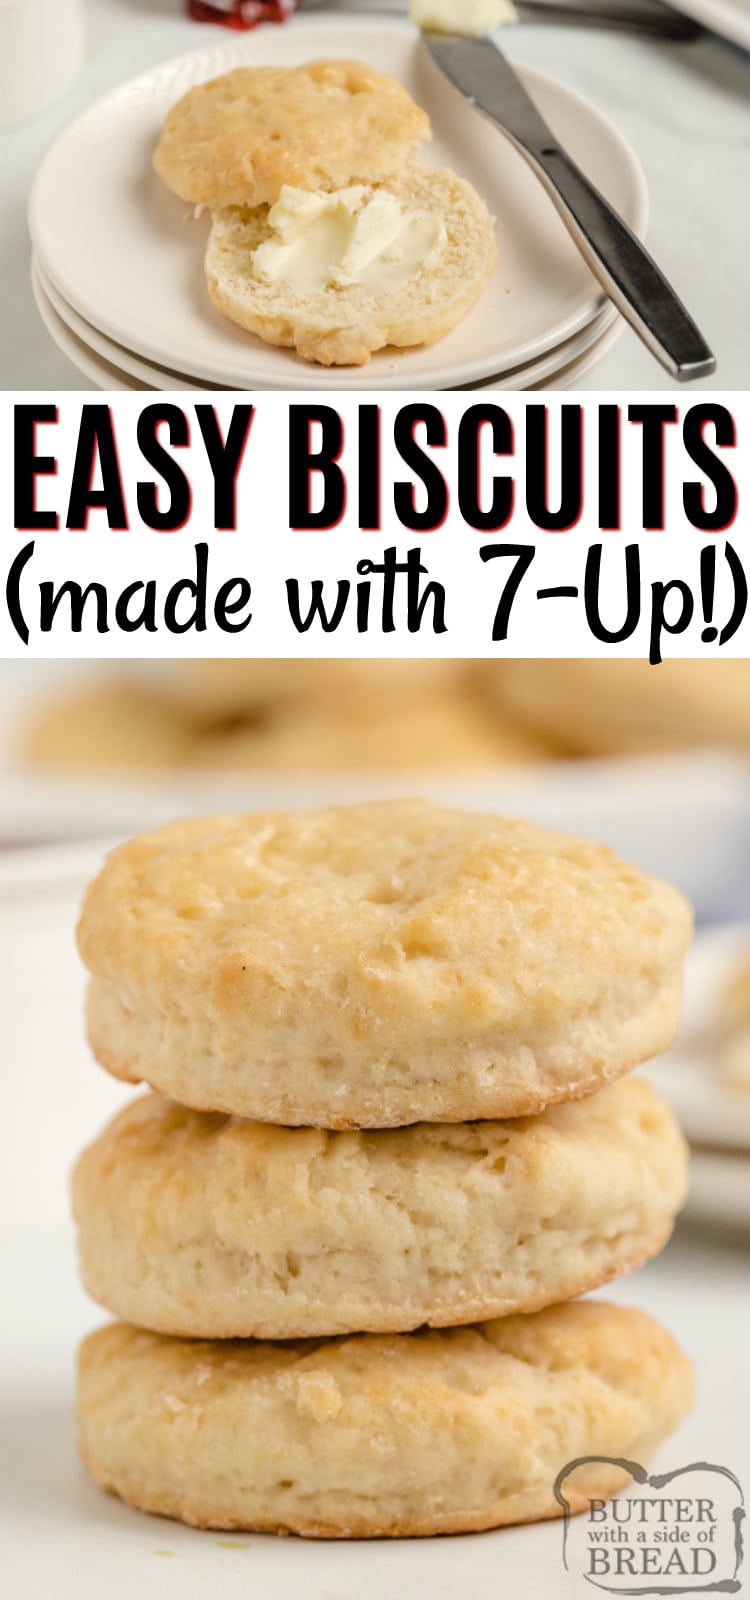 Easy 7-Up Biscuits are made with six simple ingredients, including 7-Up soda! Only a few minutes to make soft, flaky biscuits that turn out perfect every time!